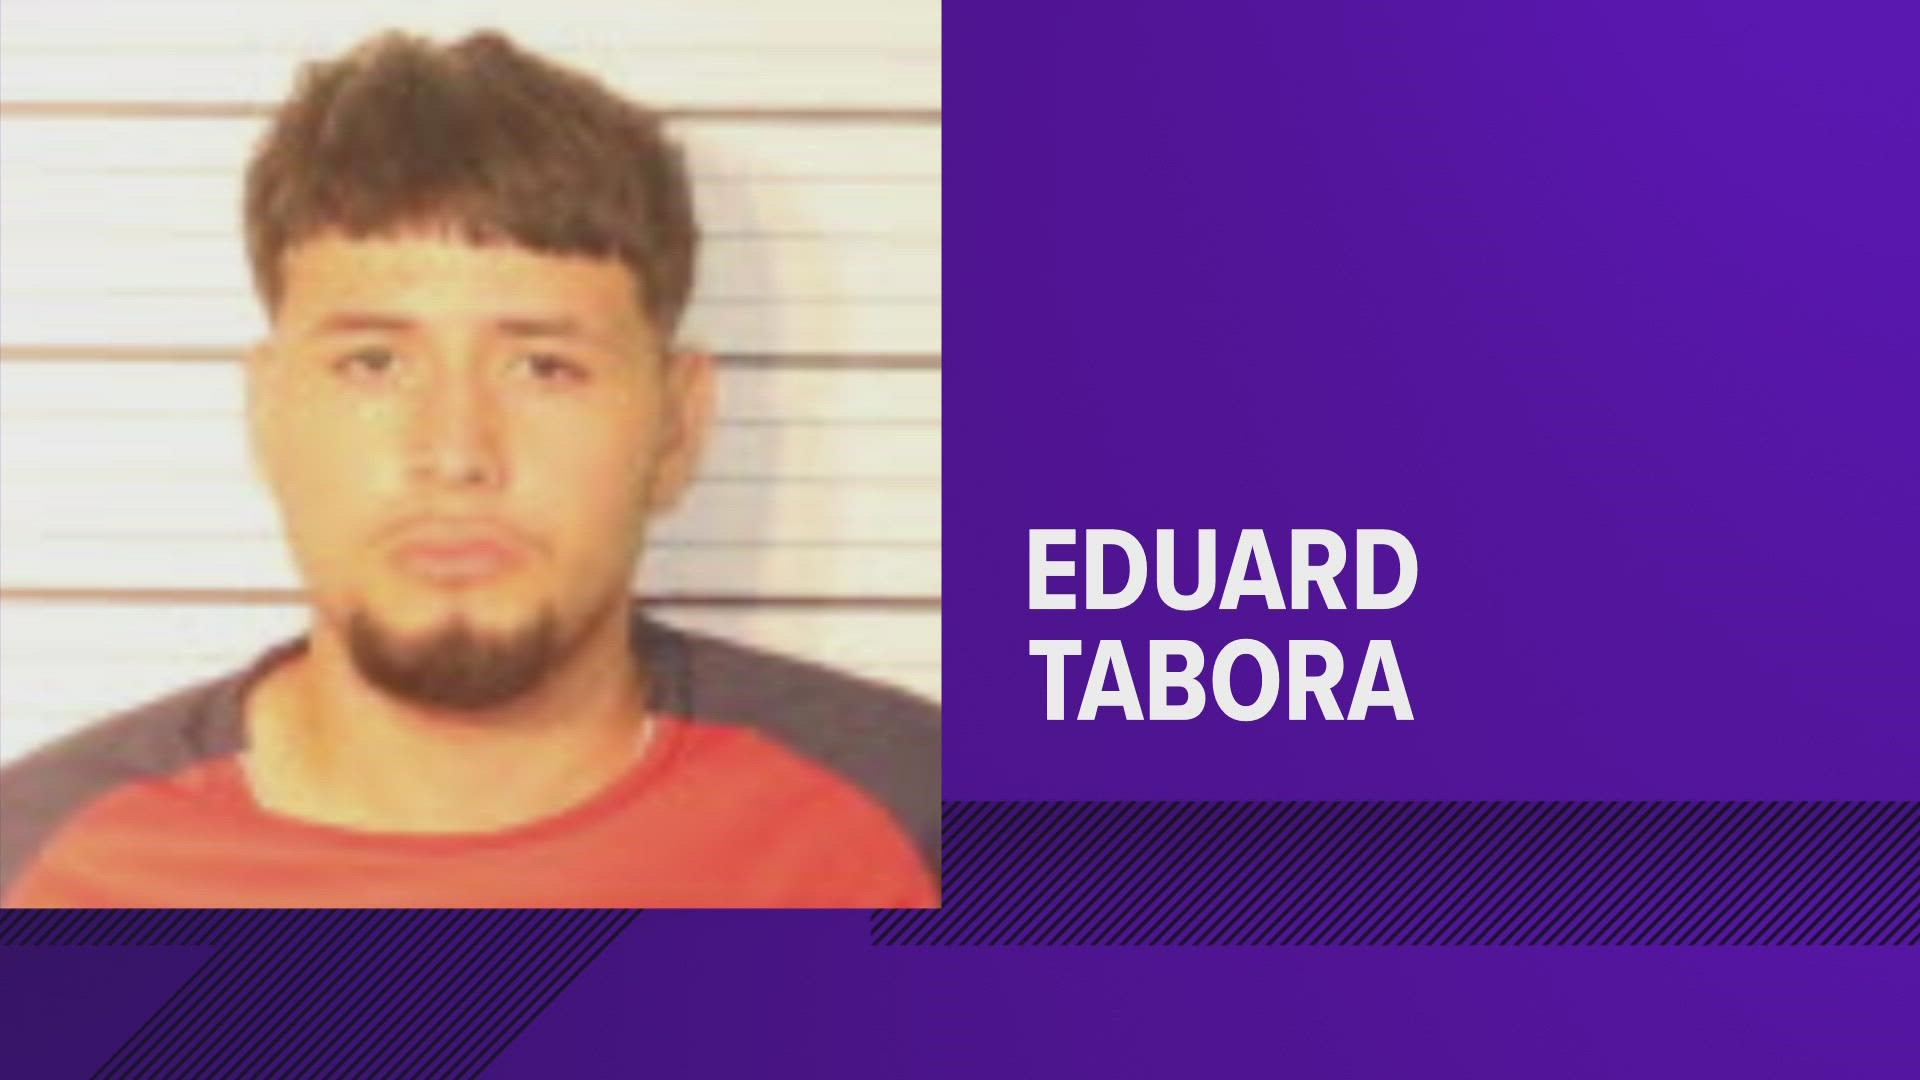 No bond was set for Eduard Rodriguez Tabora. He is due back in court Aug. 1, 2022.